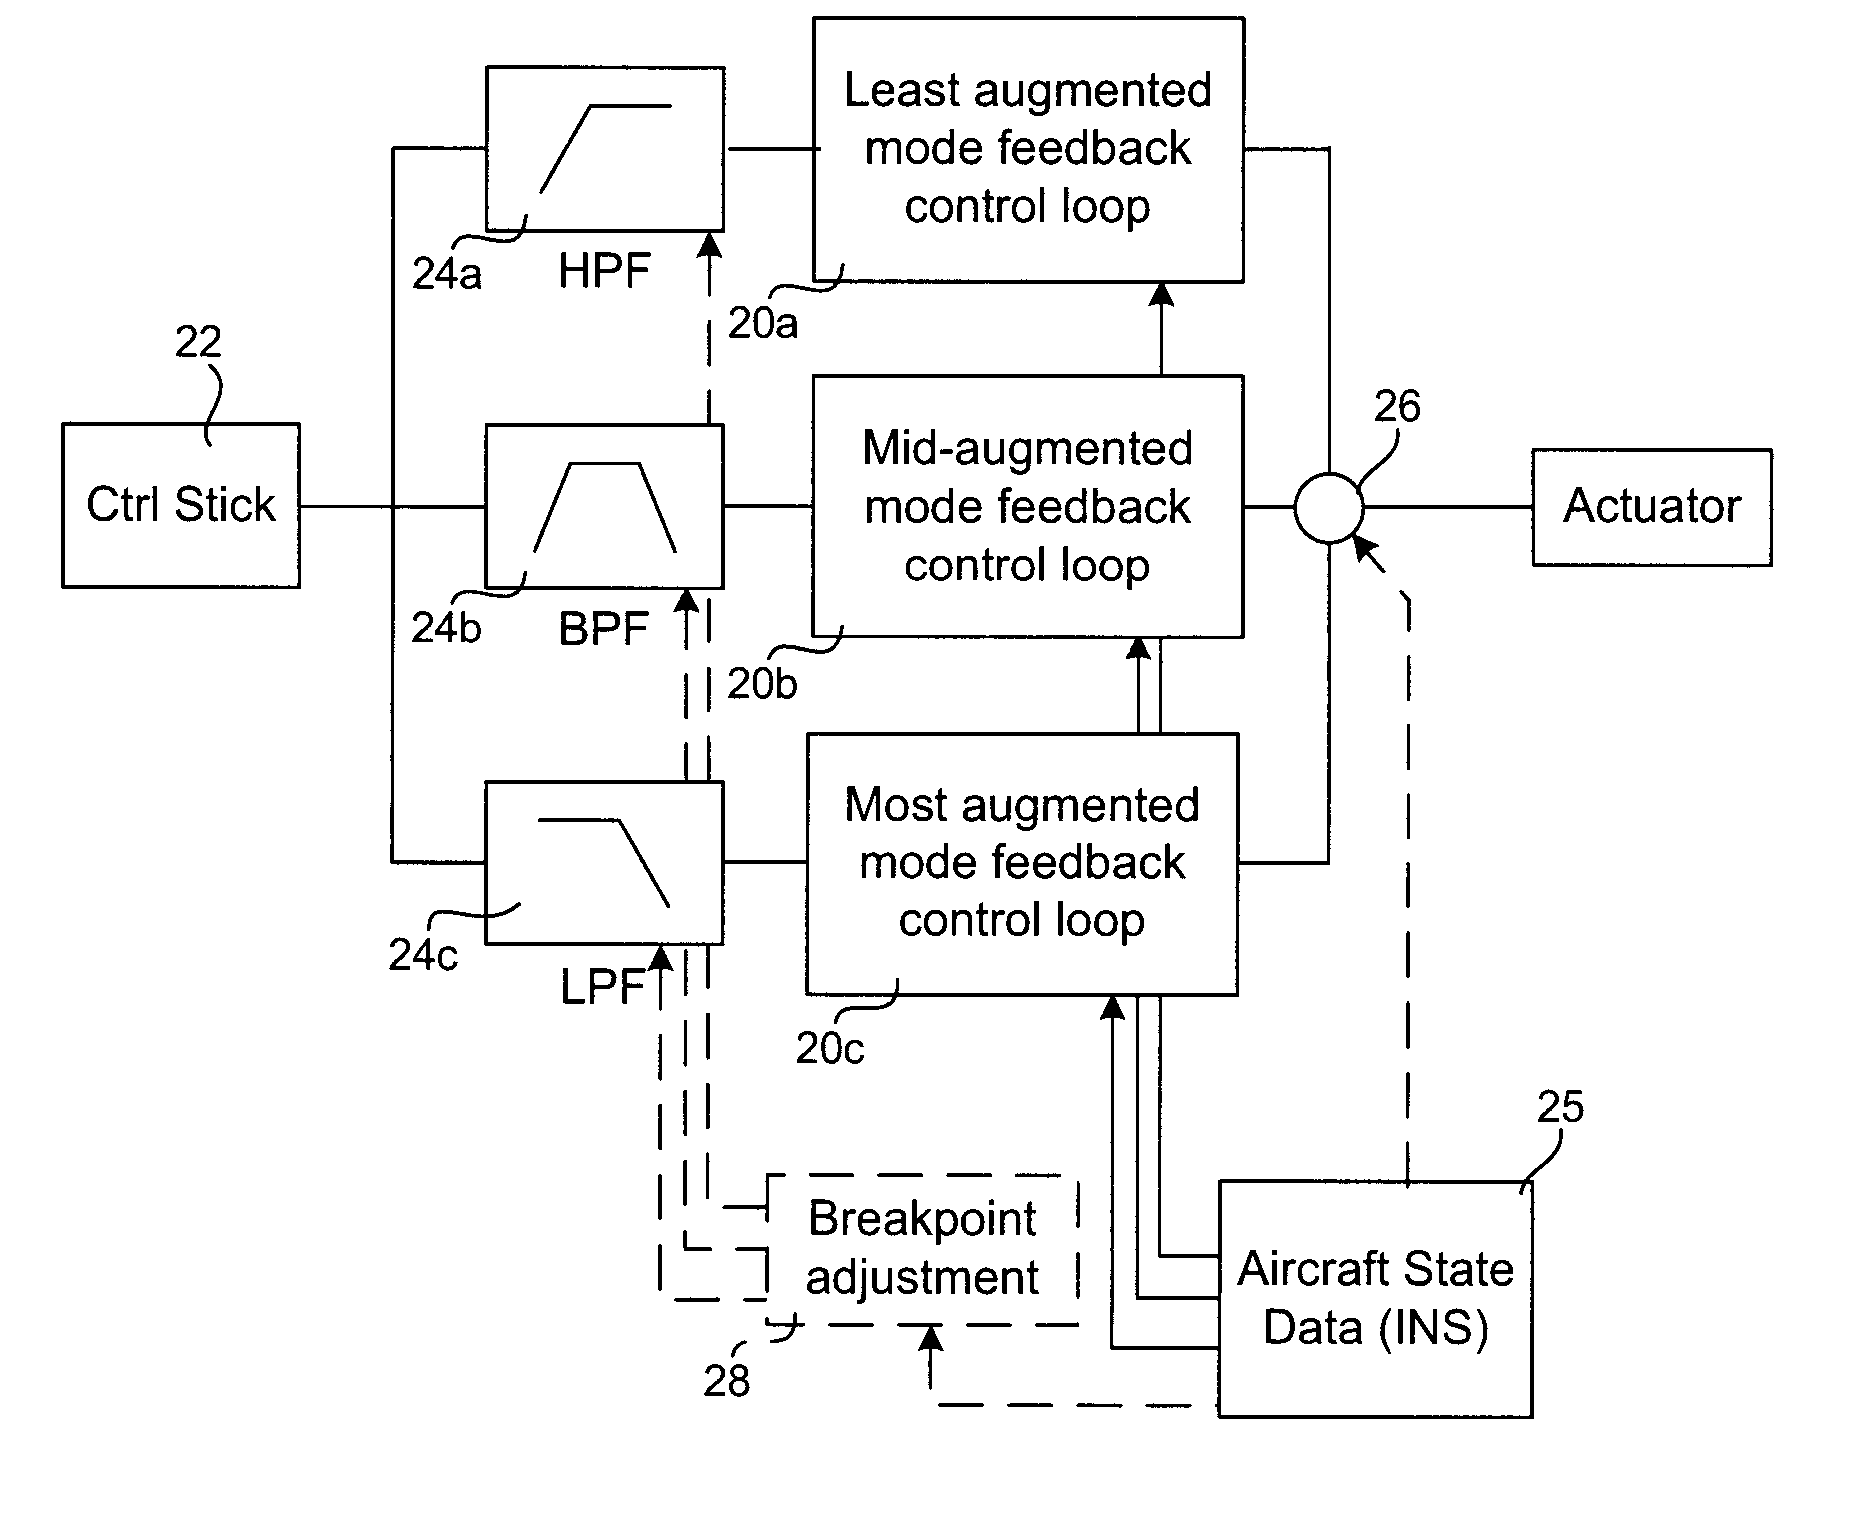 Response mode for control system of piloted craft